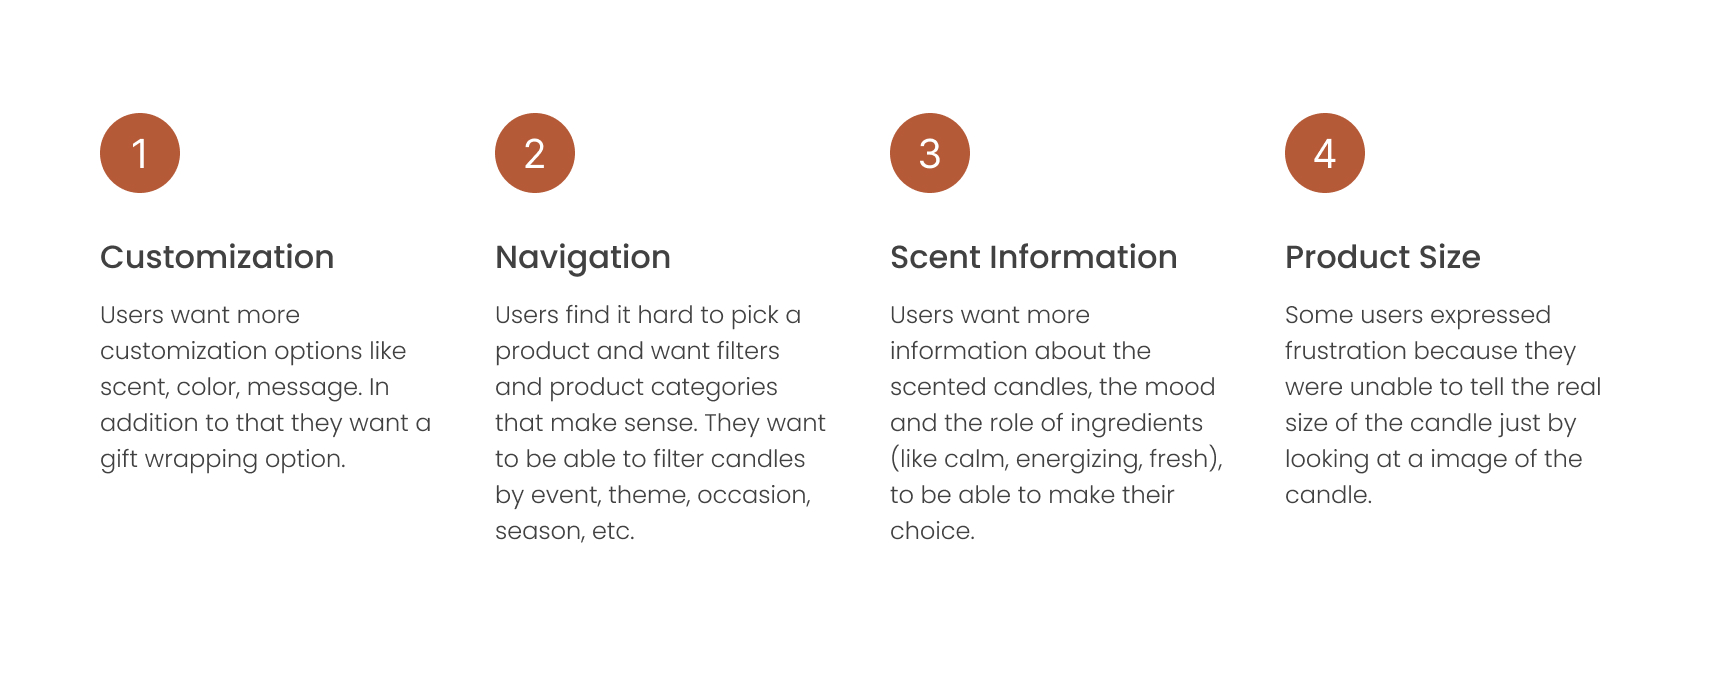 User Pain Points: Customization, Navigation, Scent Information, Product Size